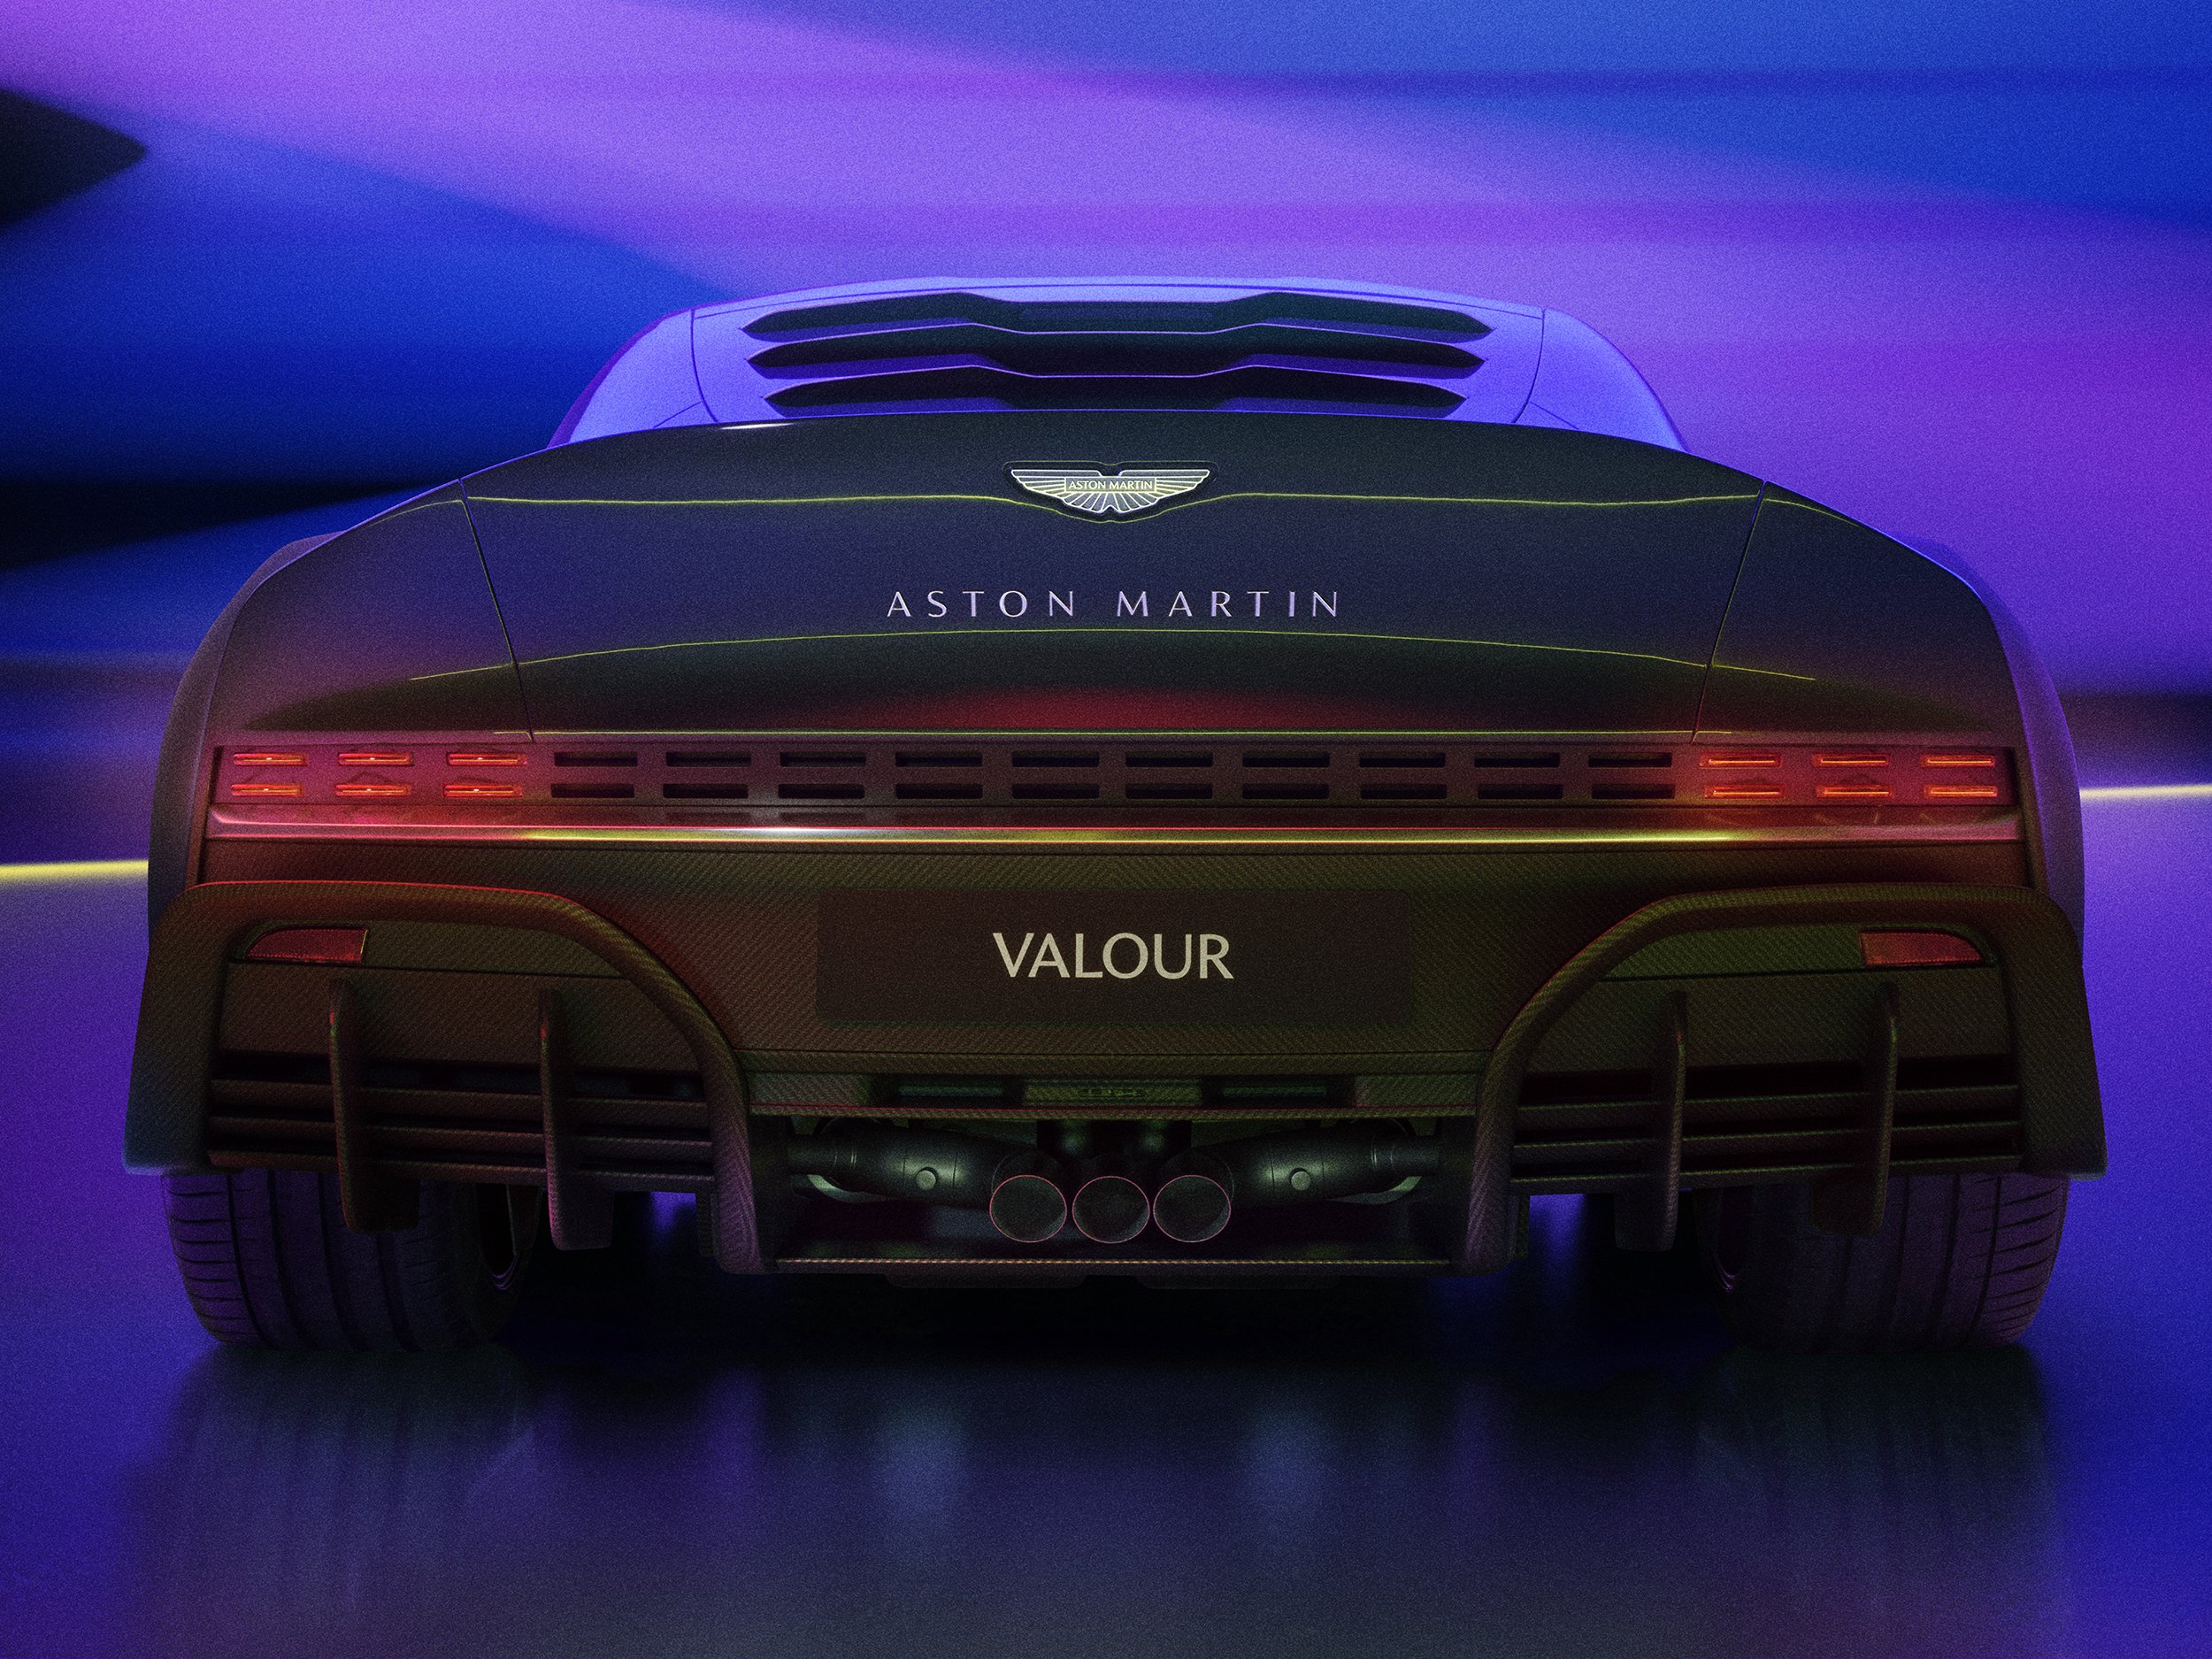 Aston Martin VALOUR – a spectacular celebration of 110 years of history